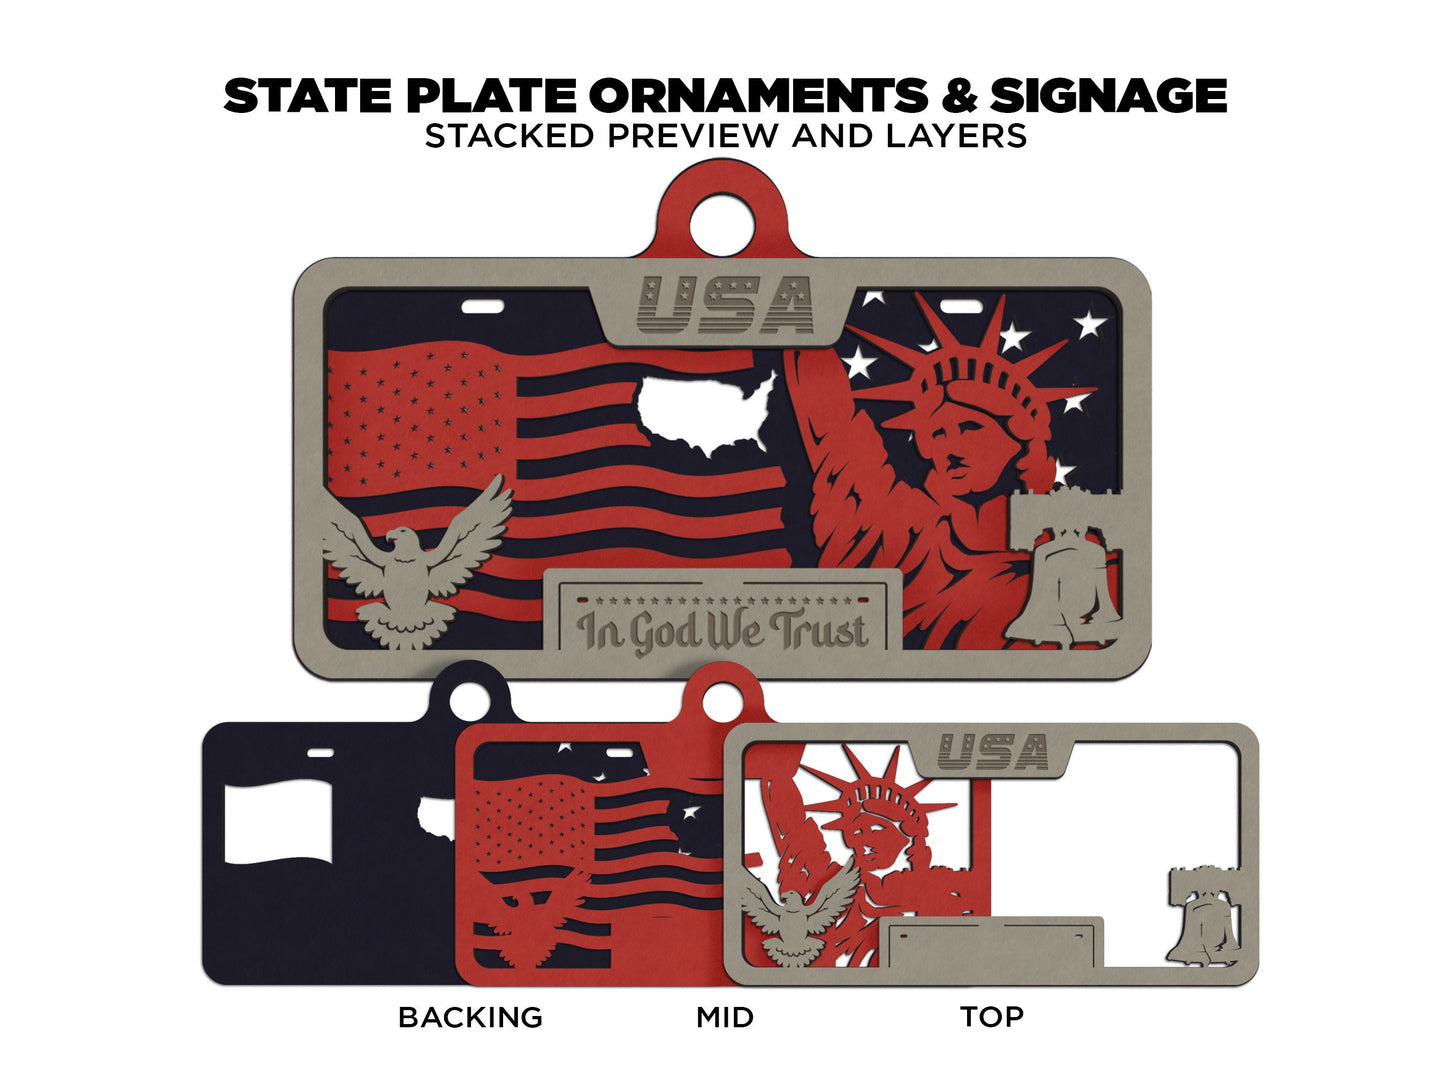 New Jersey State Plate Ornament and Signage - SVG File Download - Sized for Glowforge - Laser Ready Digital Files